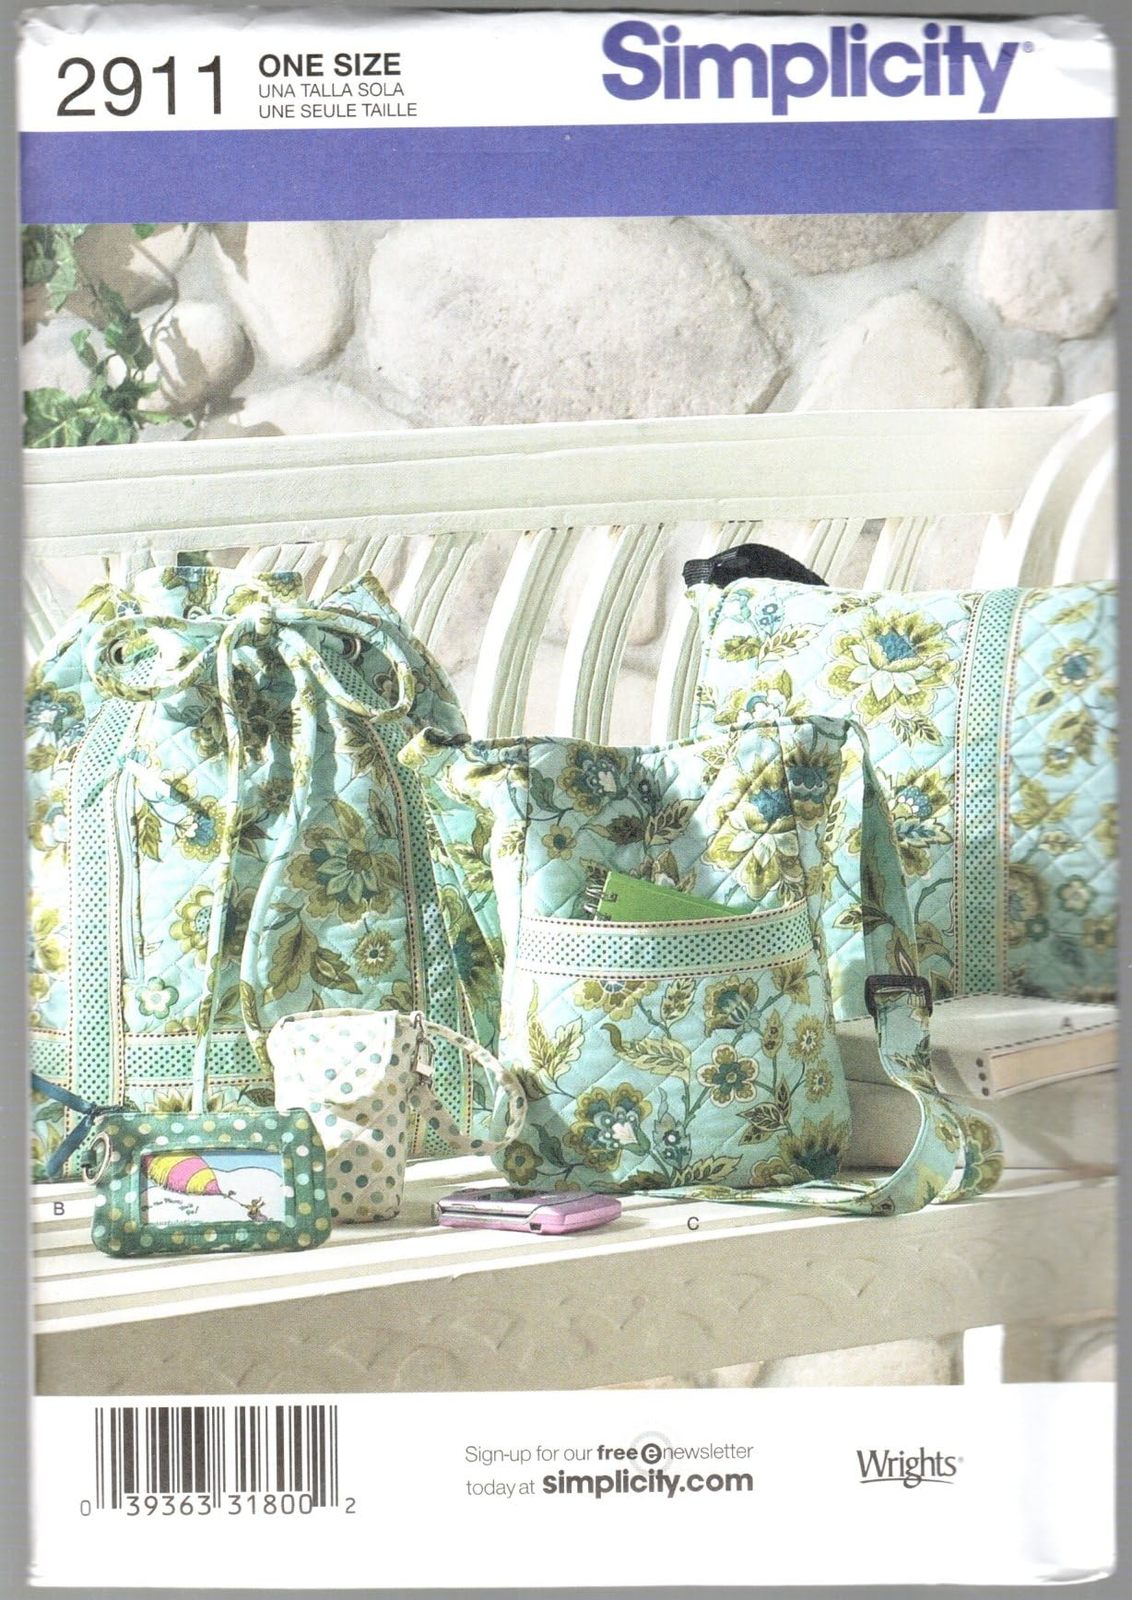 Simplicity Pattern 2911 Bags and Accessories - Messenger Bag, Backpack, Hipster, - $14.99